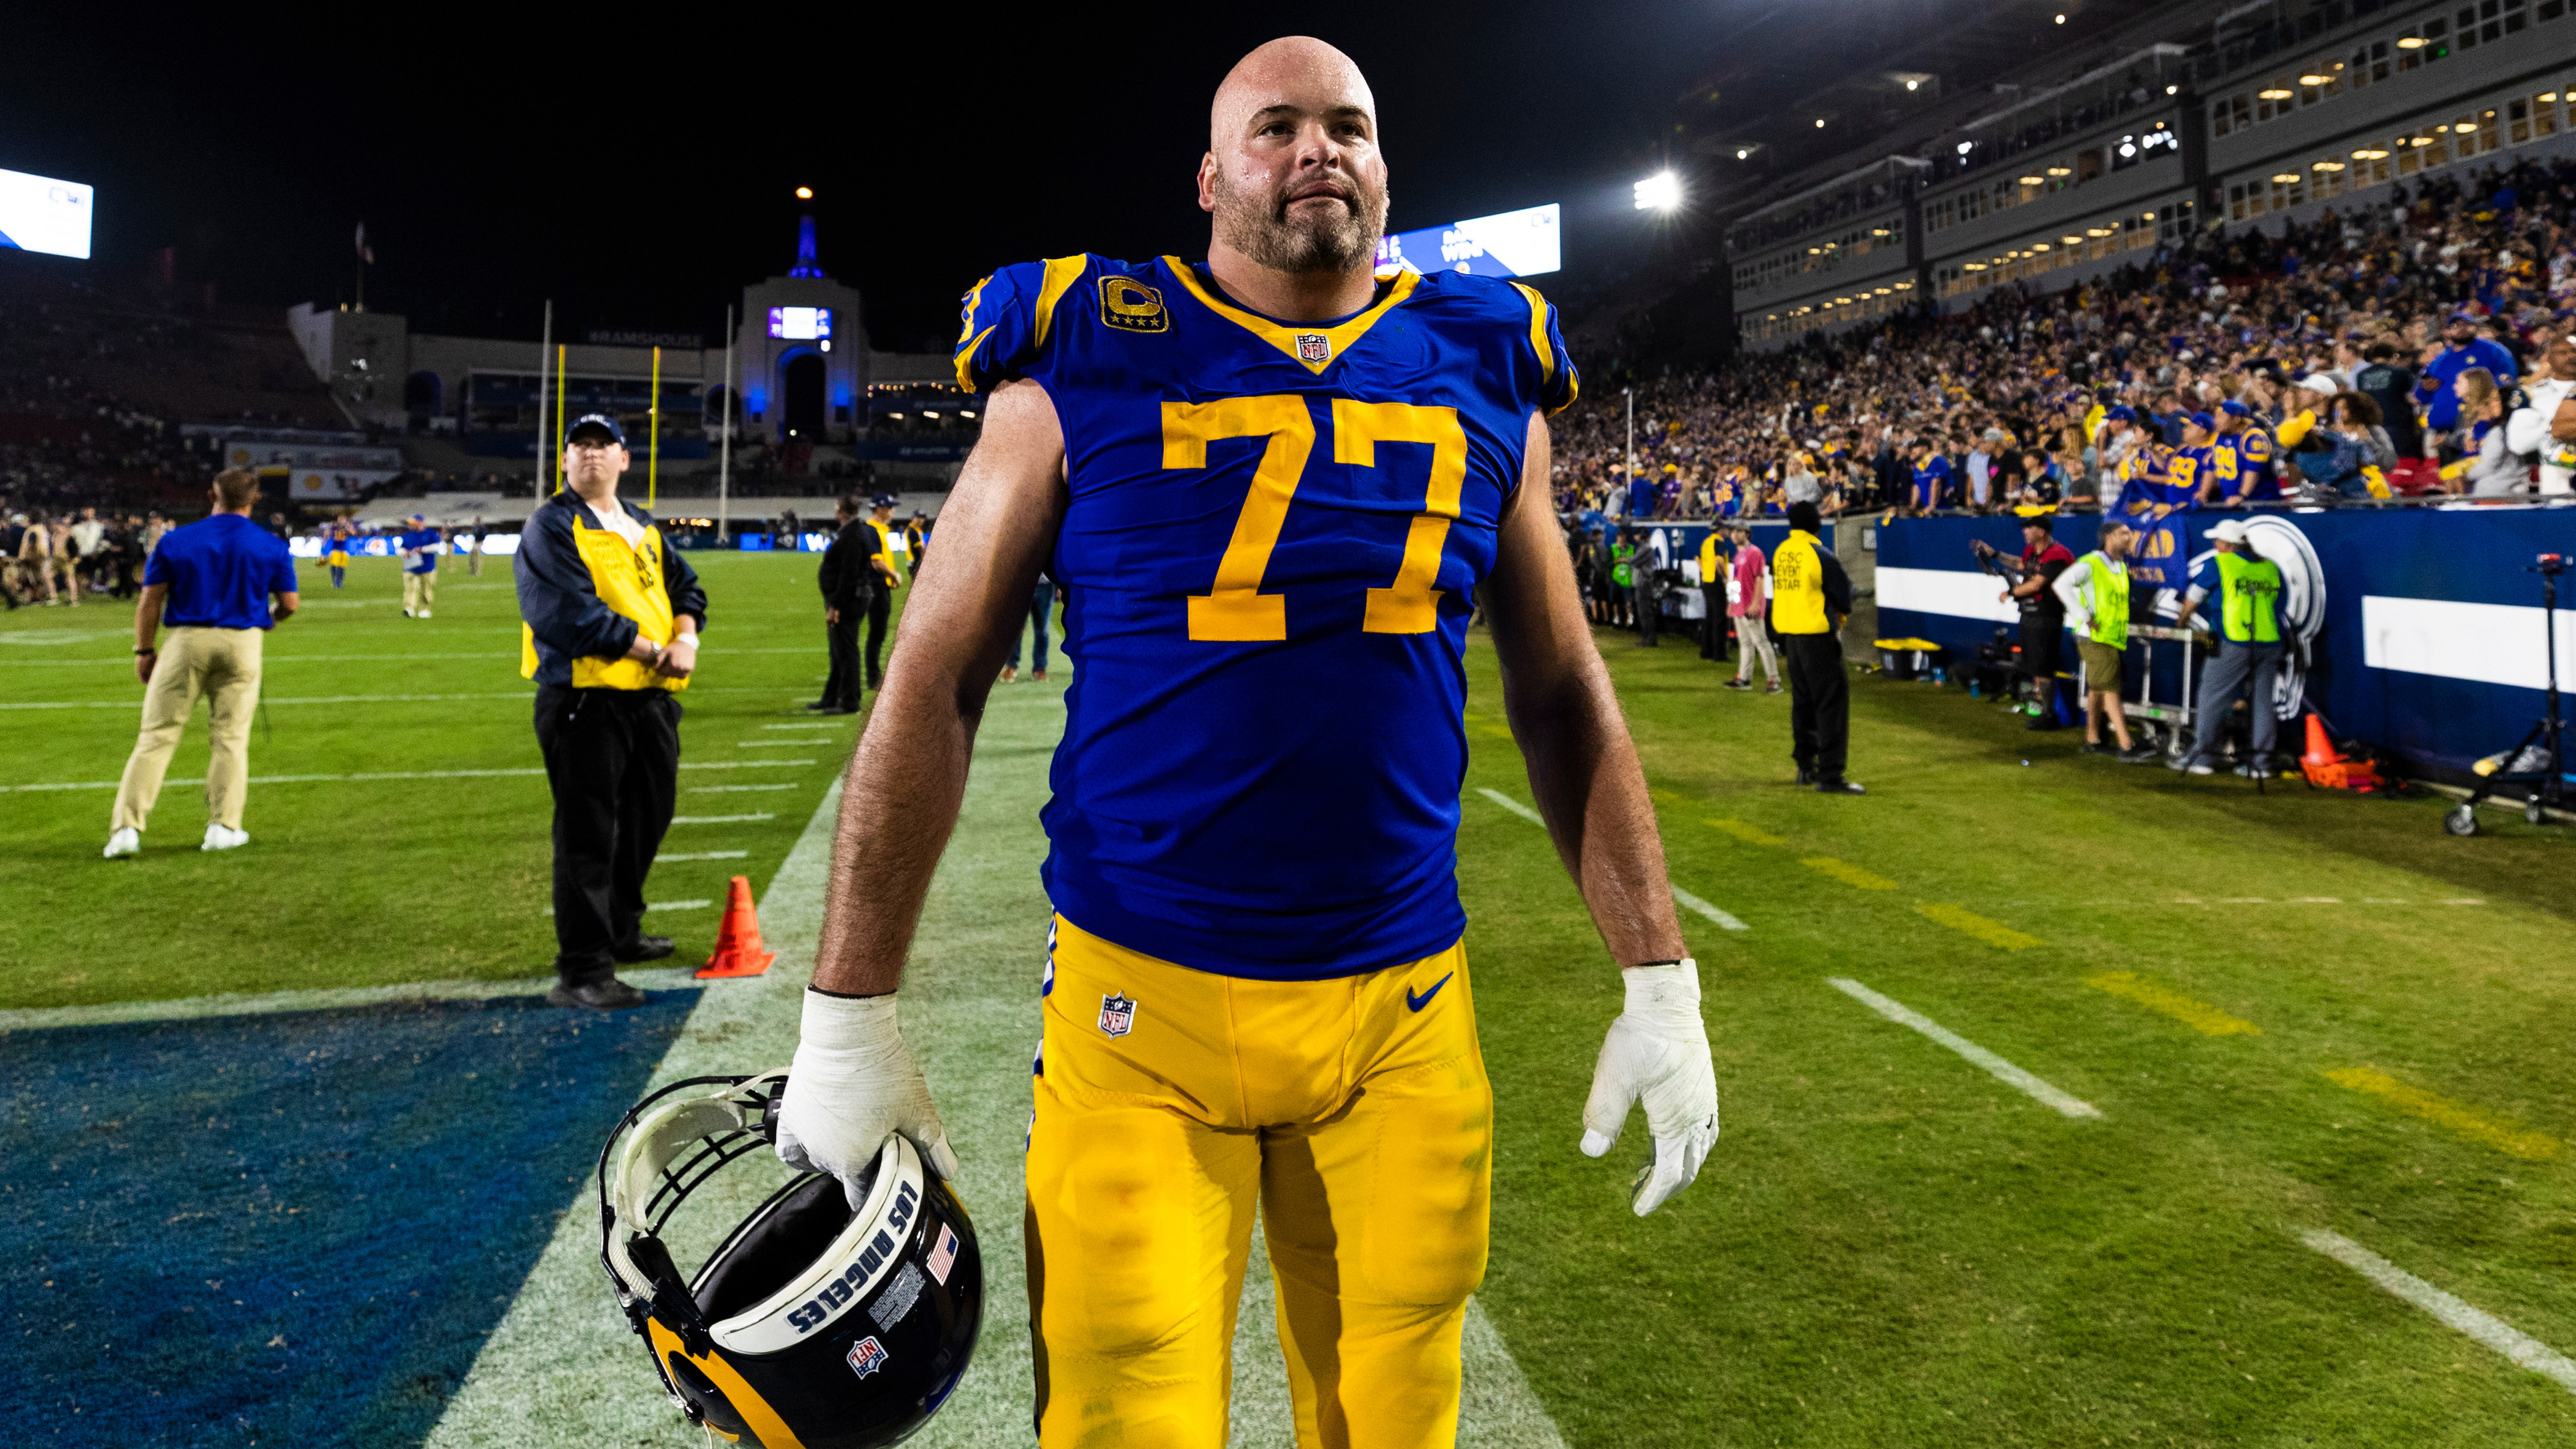 ANDREW WHITWORTH HAS CHANCE TO JOIN ELITE LSU GROUP ON SUNDAY